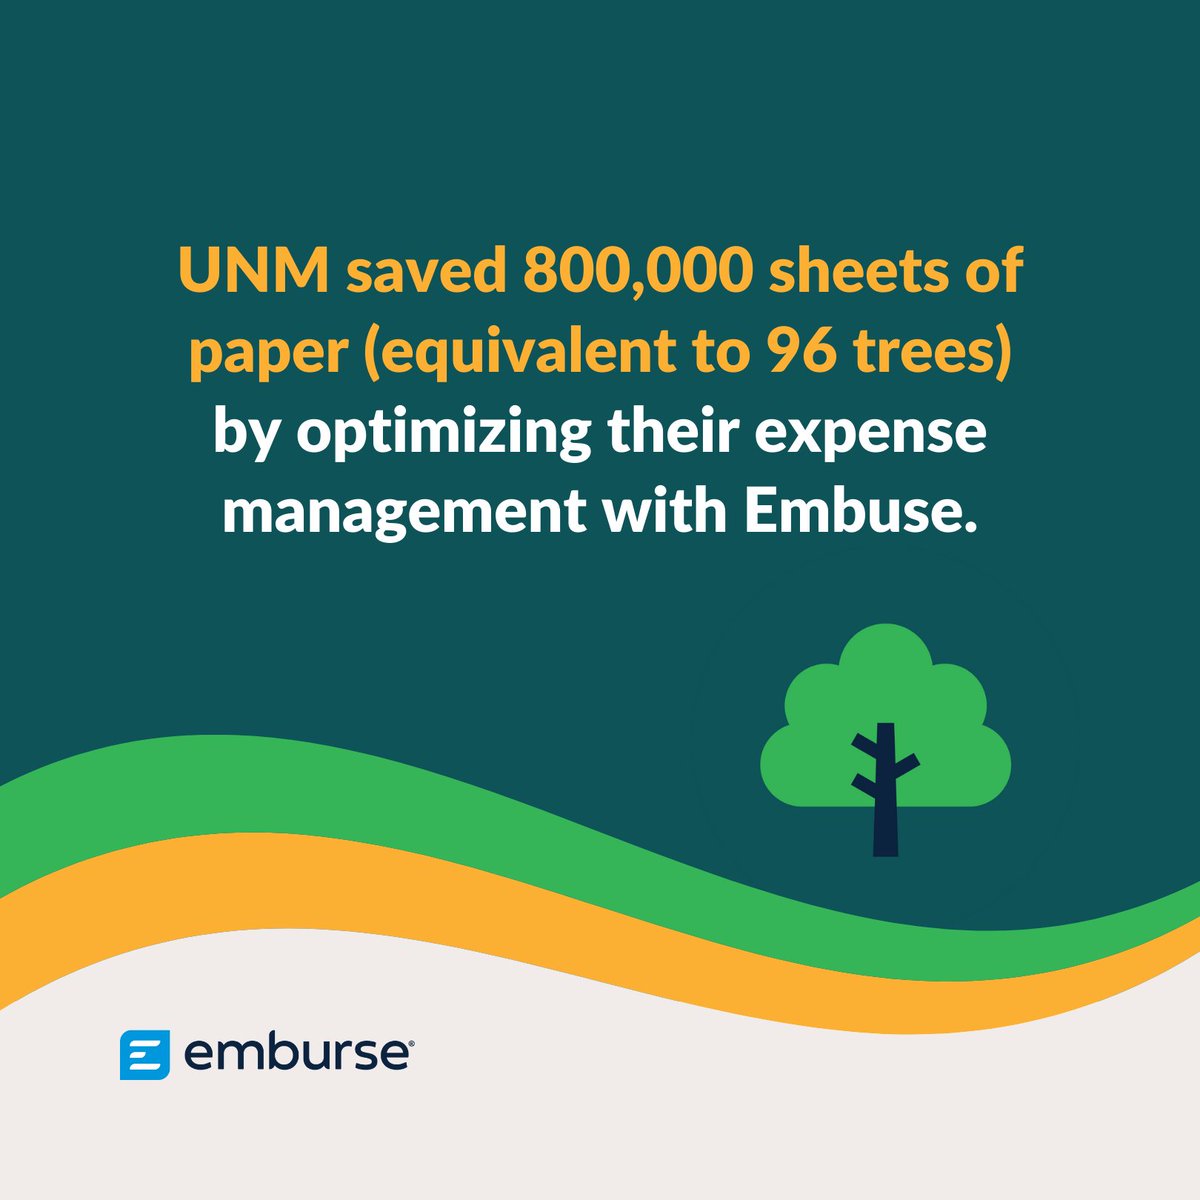 Automating #expensemanagement is about more than just improving processes and efficiency. 

It also creates more sustainable operations, just like @unm saved 96 trees (800,000 sheets of paper)

Learn more: bit.ly/3OrBas1
#earthday #sustainability #highered